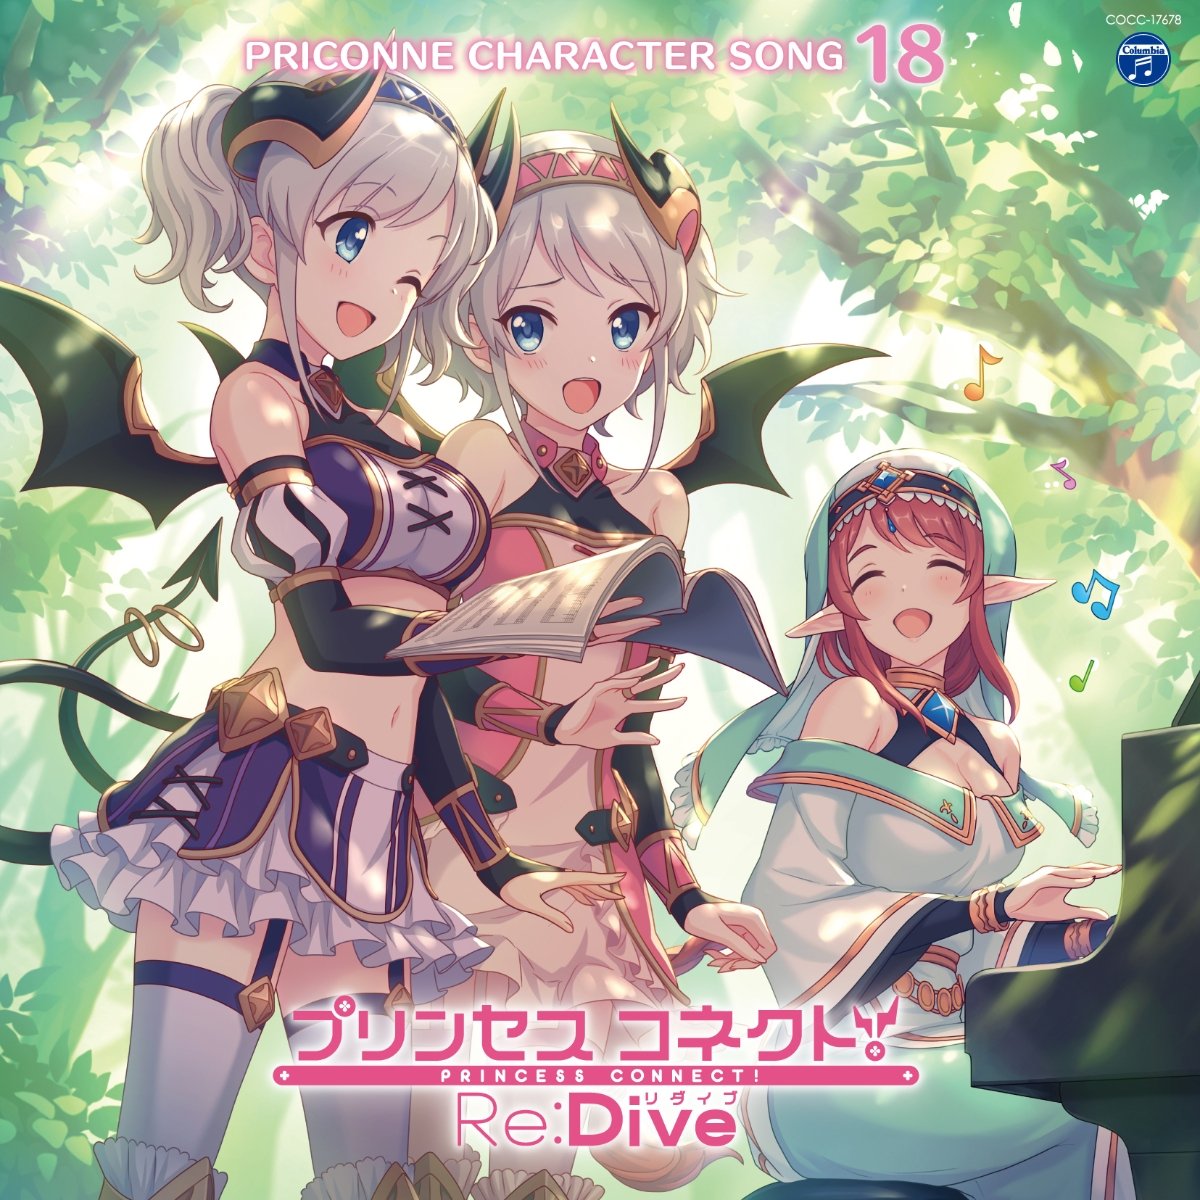 CD Shop - OST PRINCESS CONNECT!RE:DIVE PRICONNE CHARACTER SONG 18